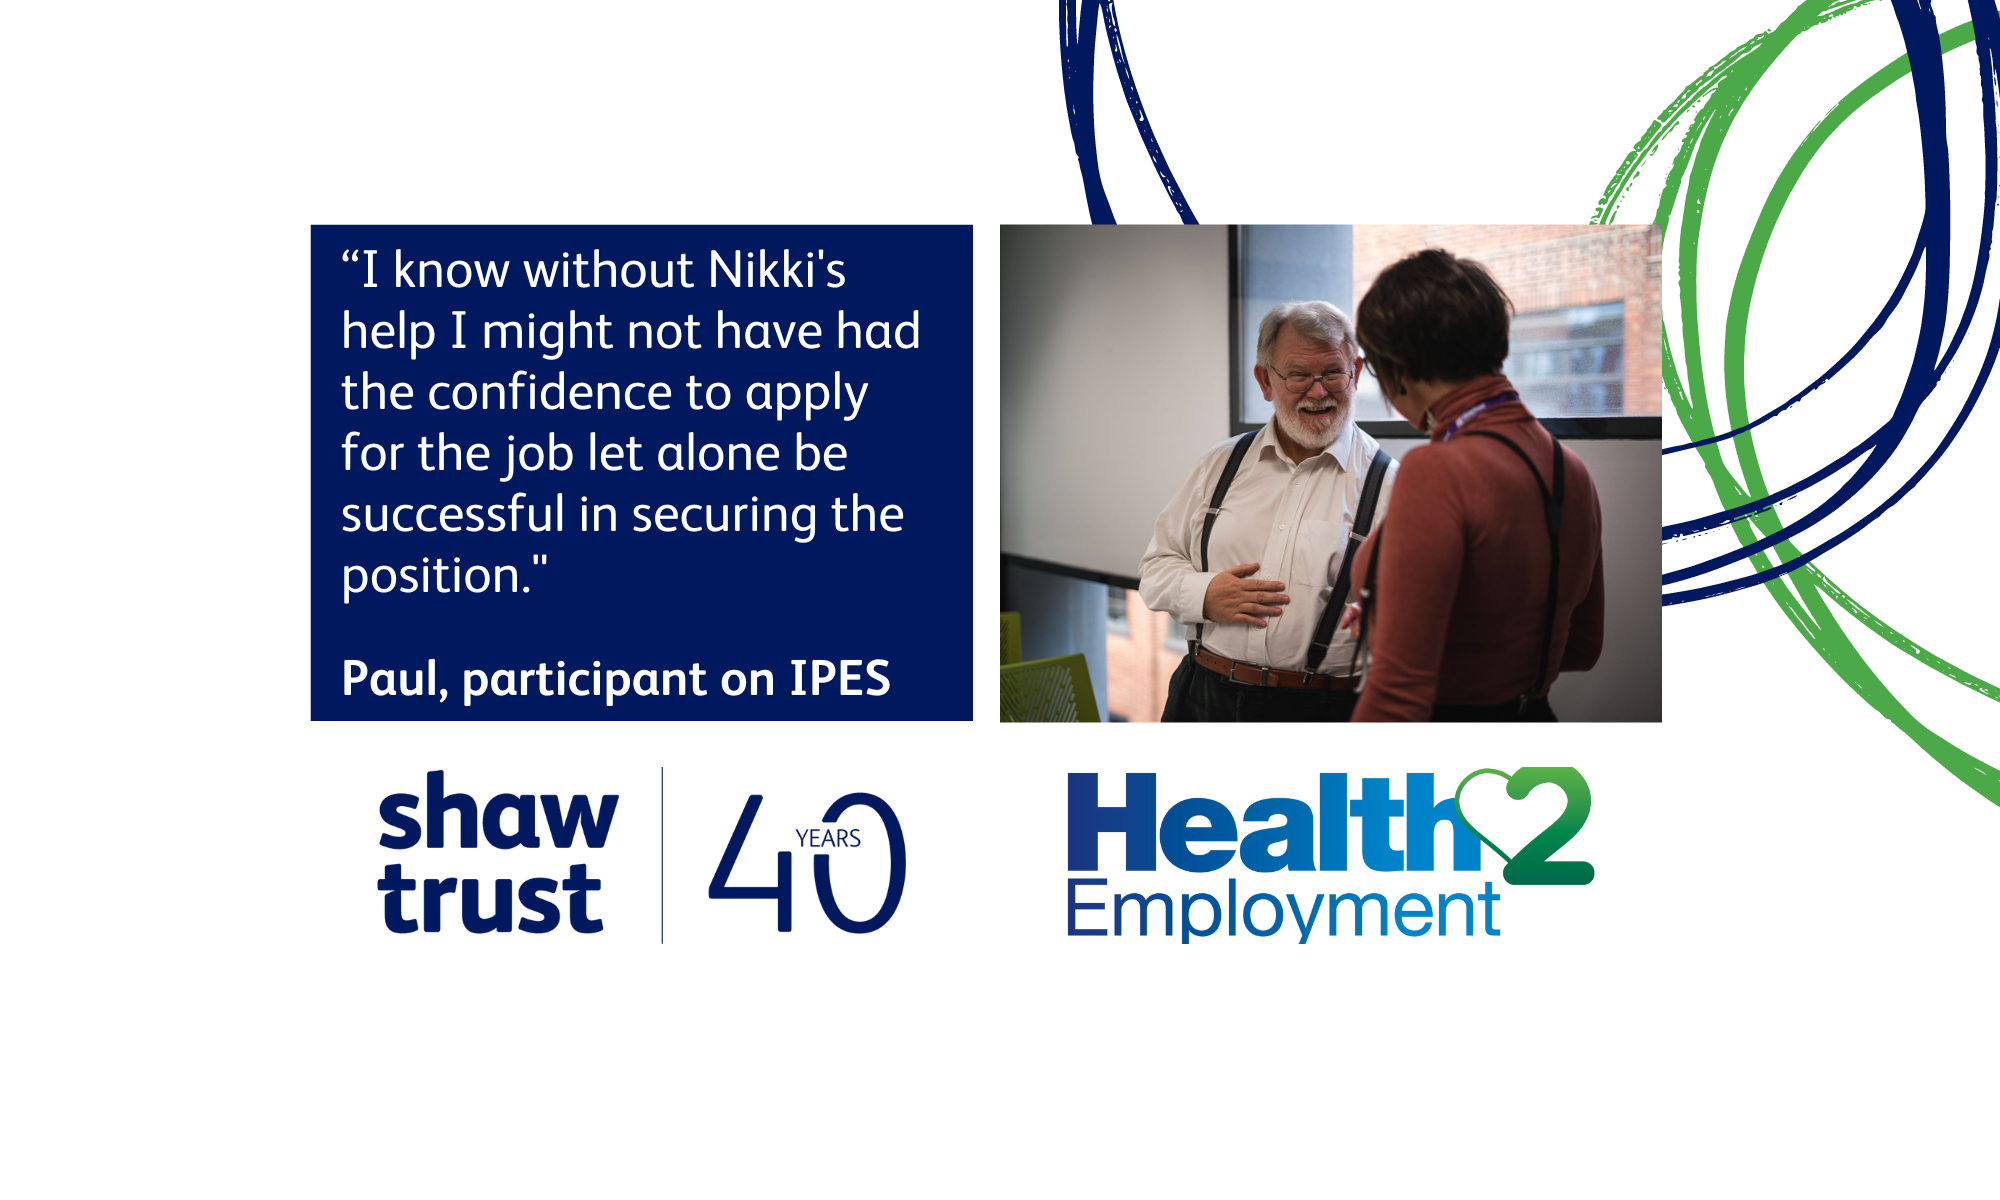 “I know without Nikki’s help I might not have had the confidence to apply for the job let alone be successful in securing the position." Paul, participant on IPES